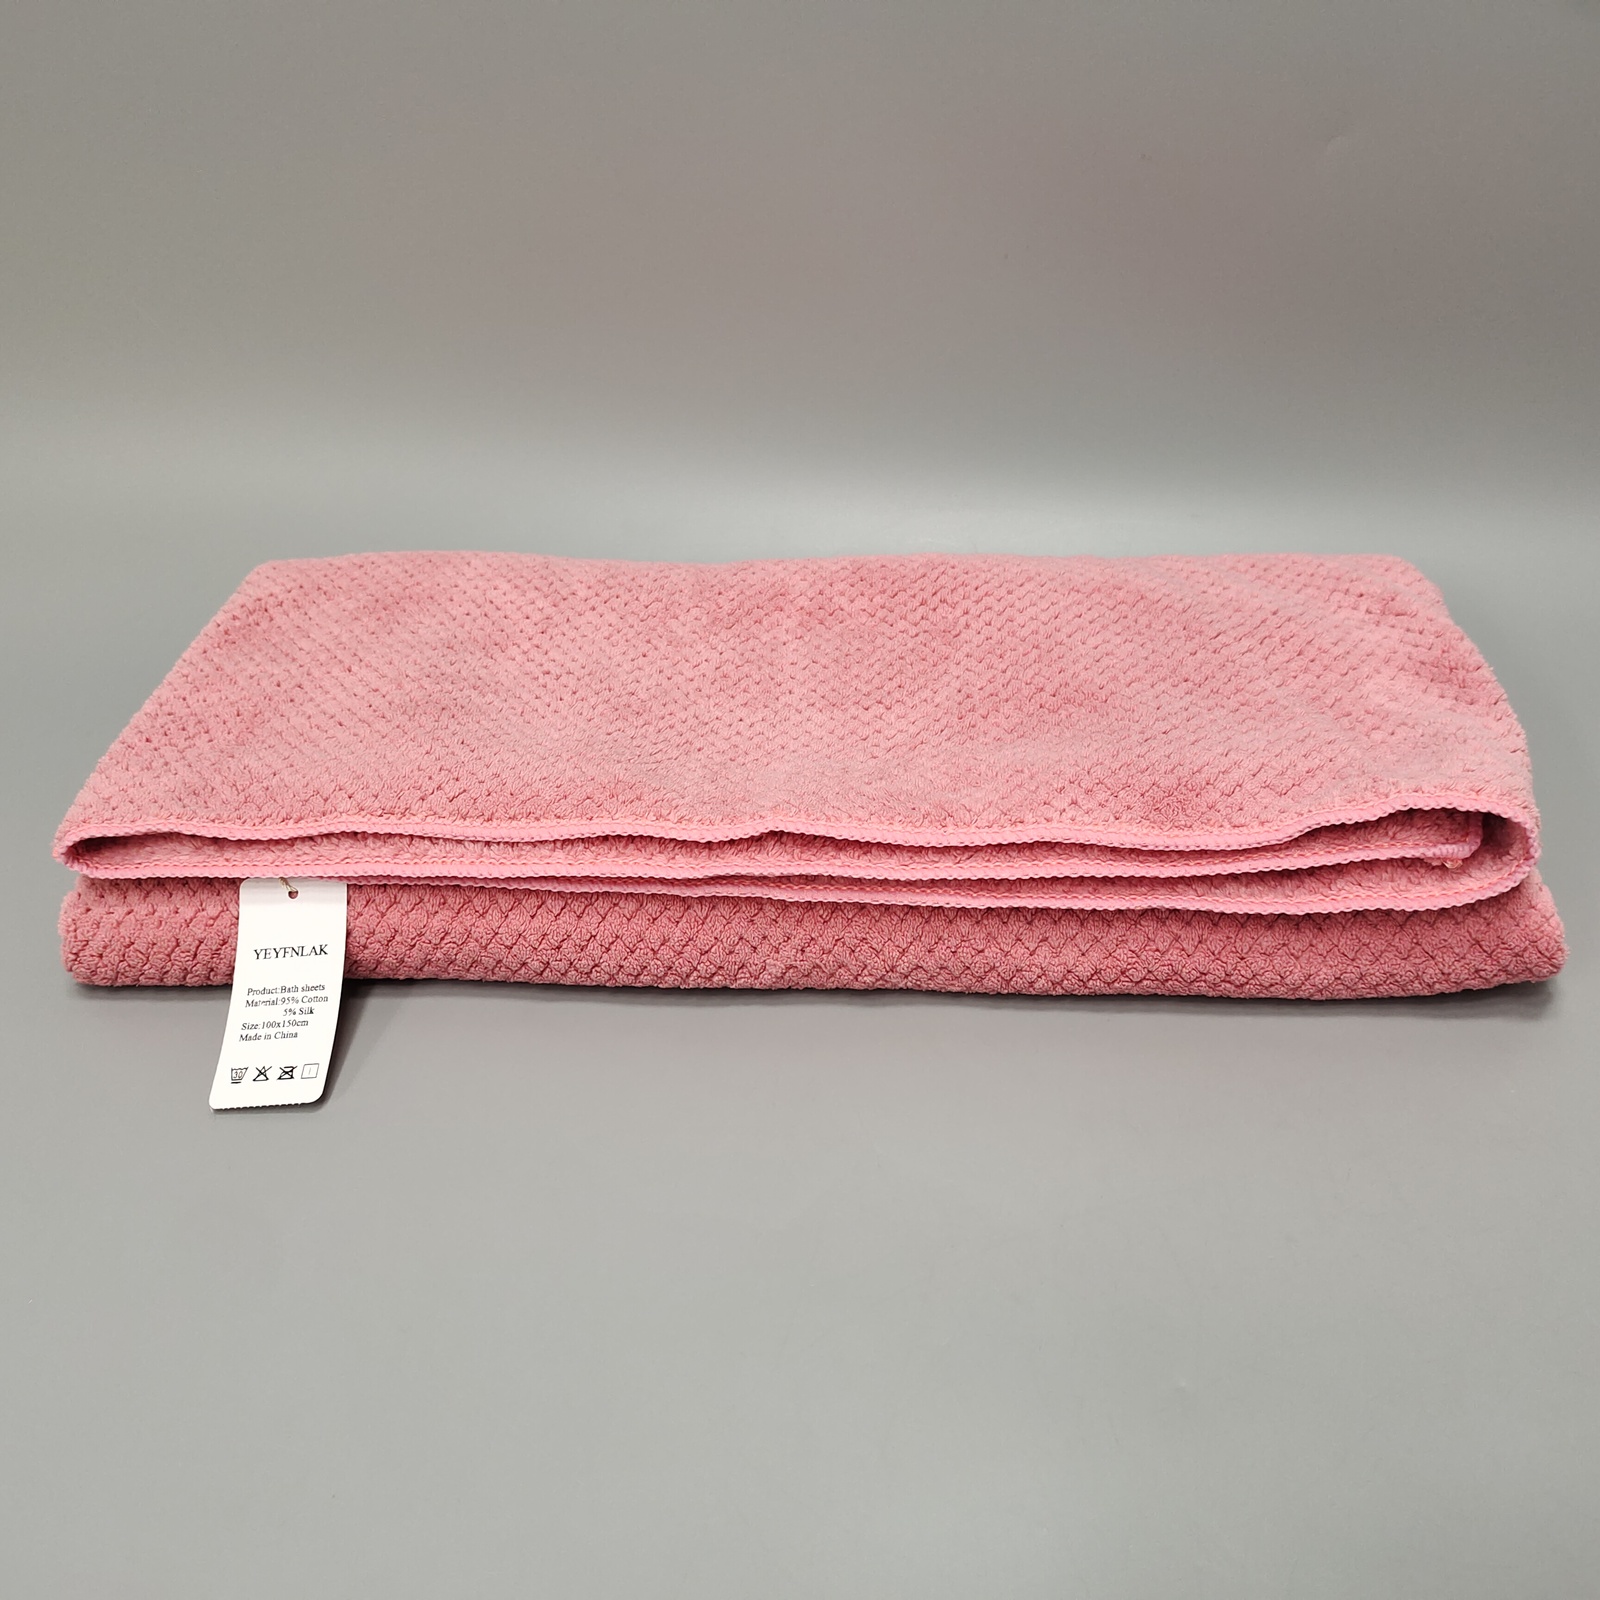 Primary image for YEYFNLAK Bath sheets Quick Dry, Lightweight,Super Soft,Highly Absorbent Towel